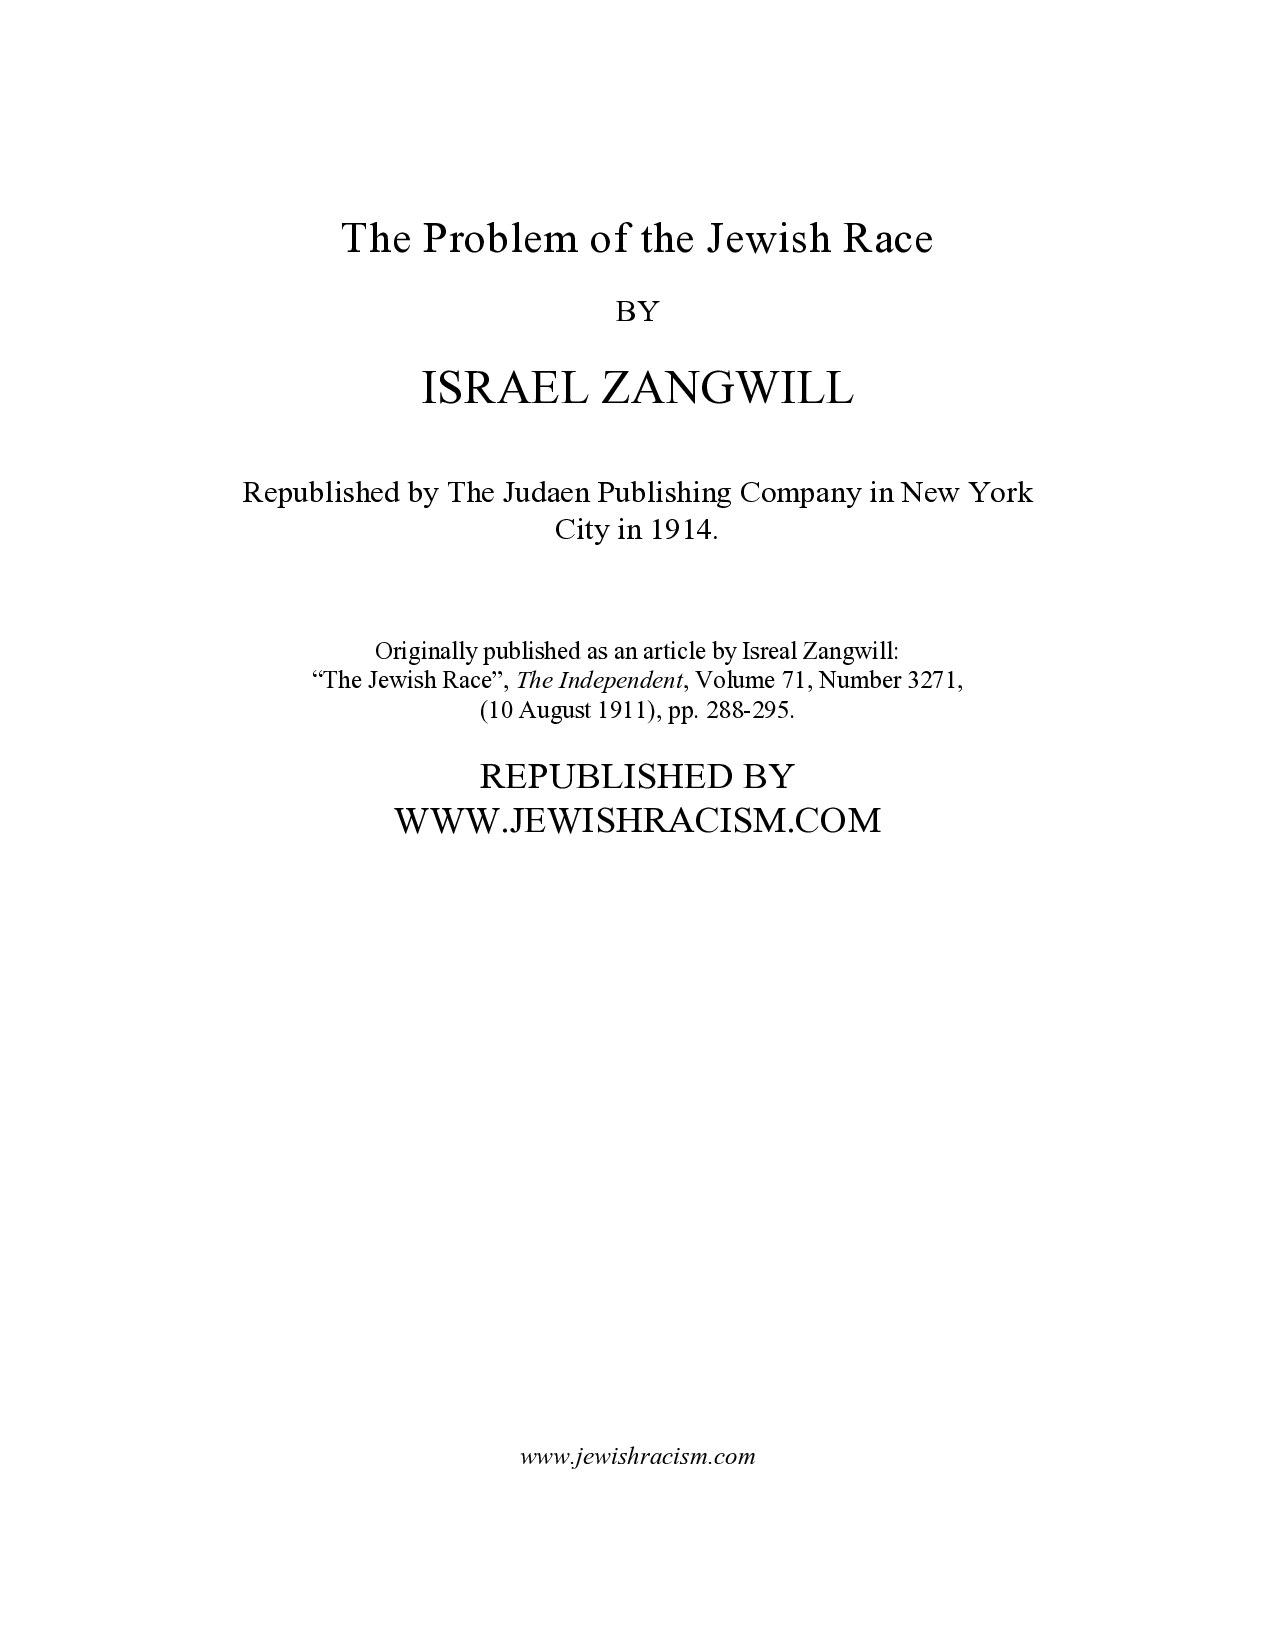 Zangwill, Israel; The Problem Of The Jewish Race